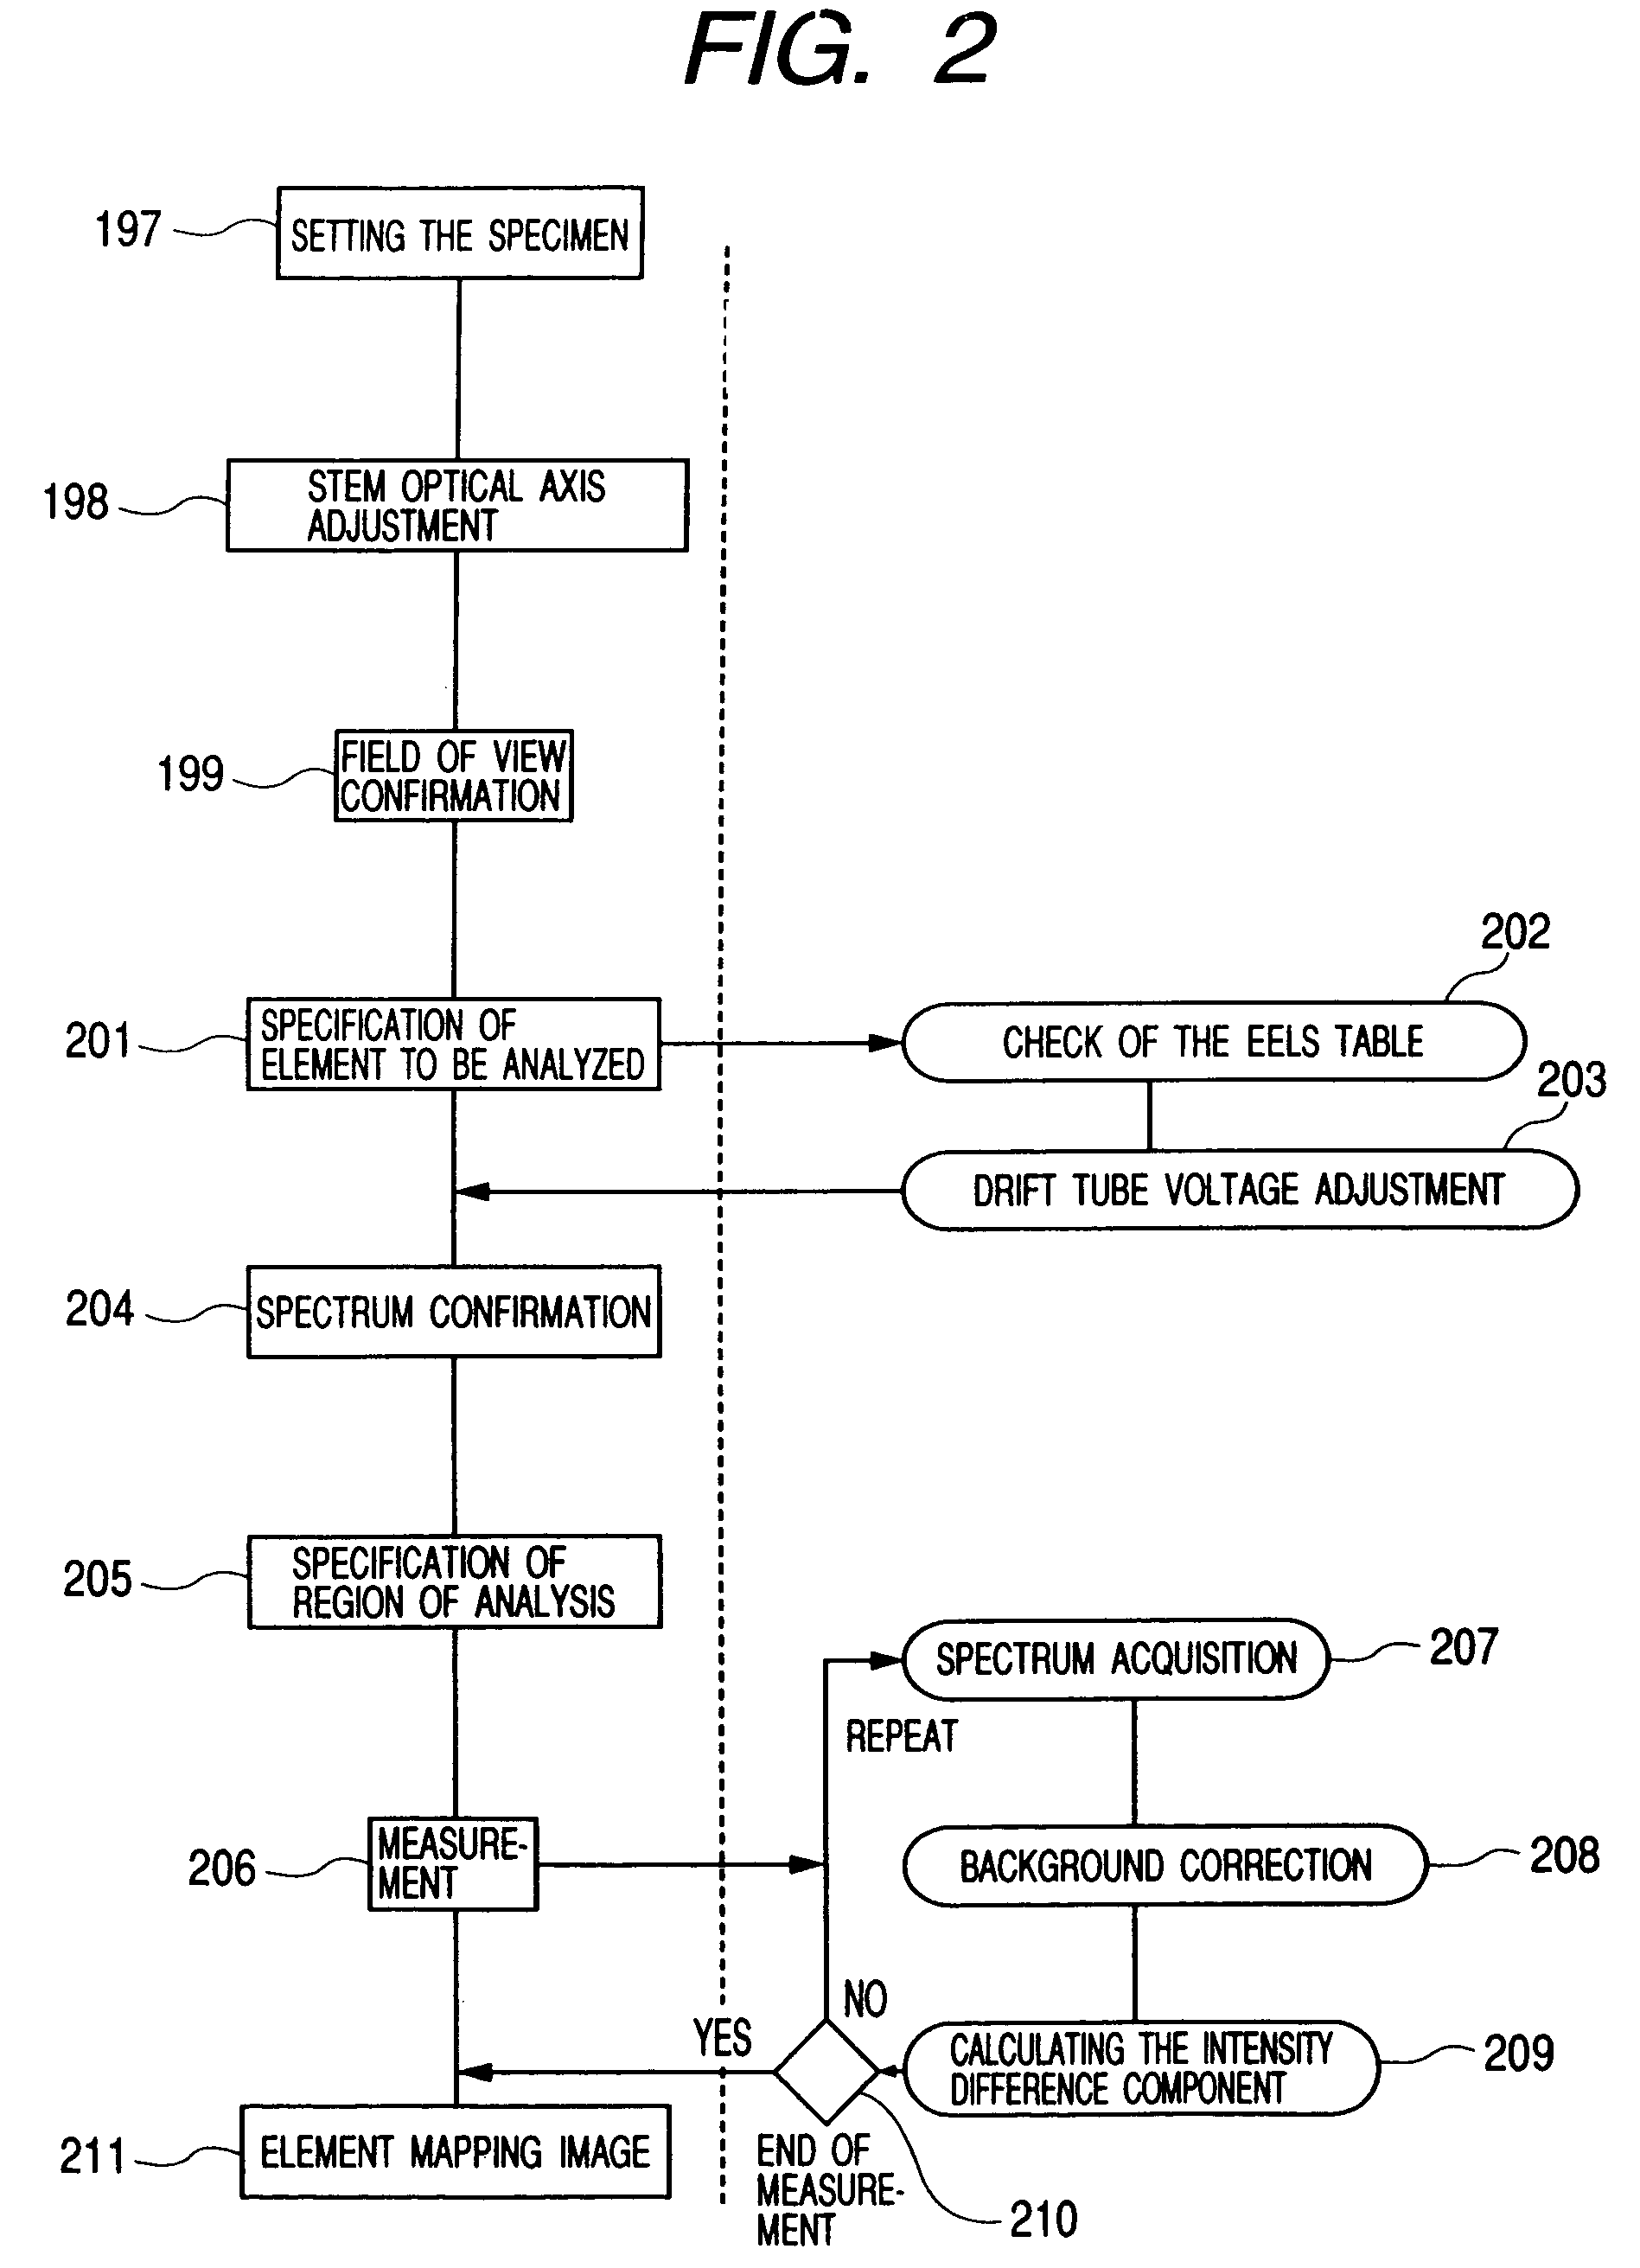 Element mapping unit, scanning transmission electron microscope, and element mapping method